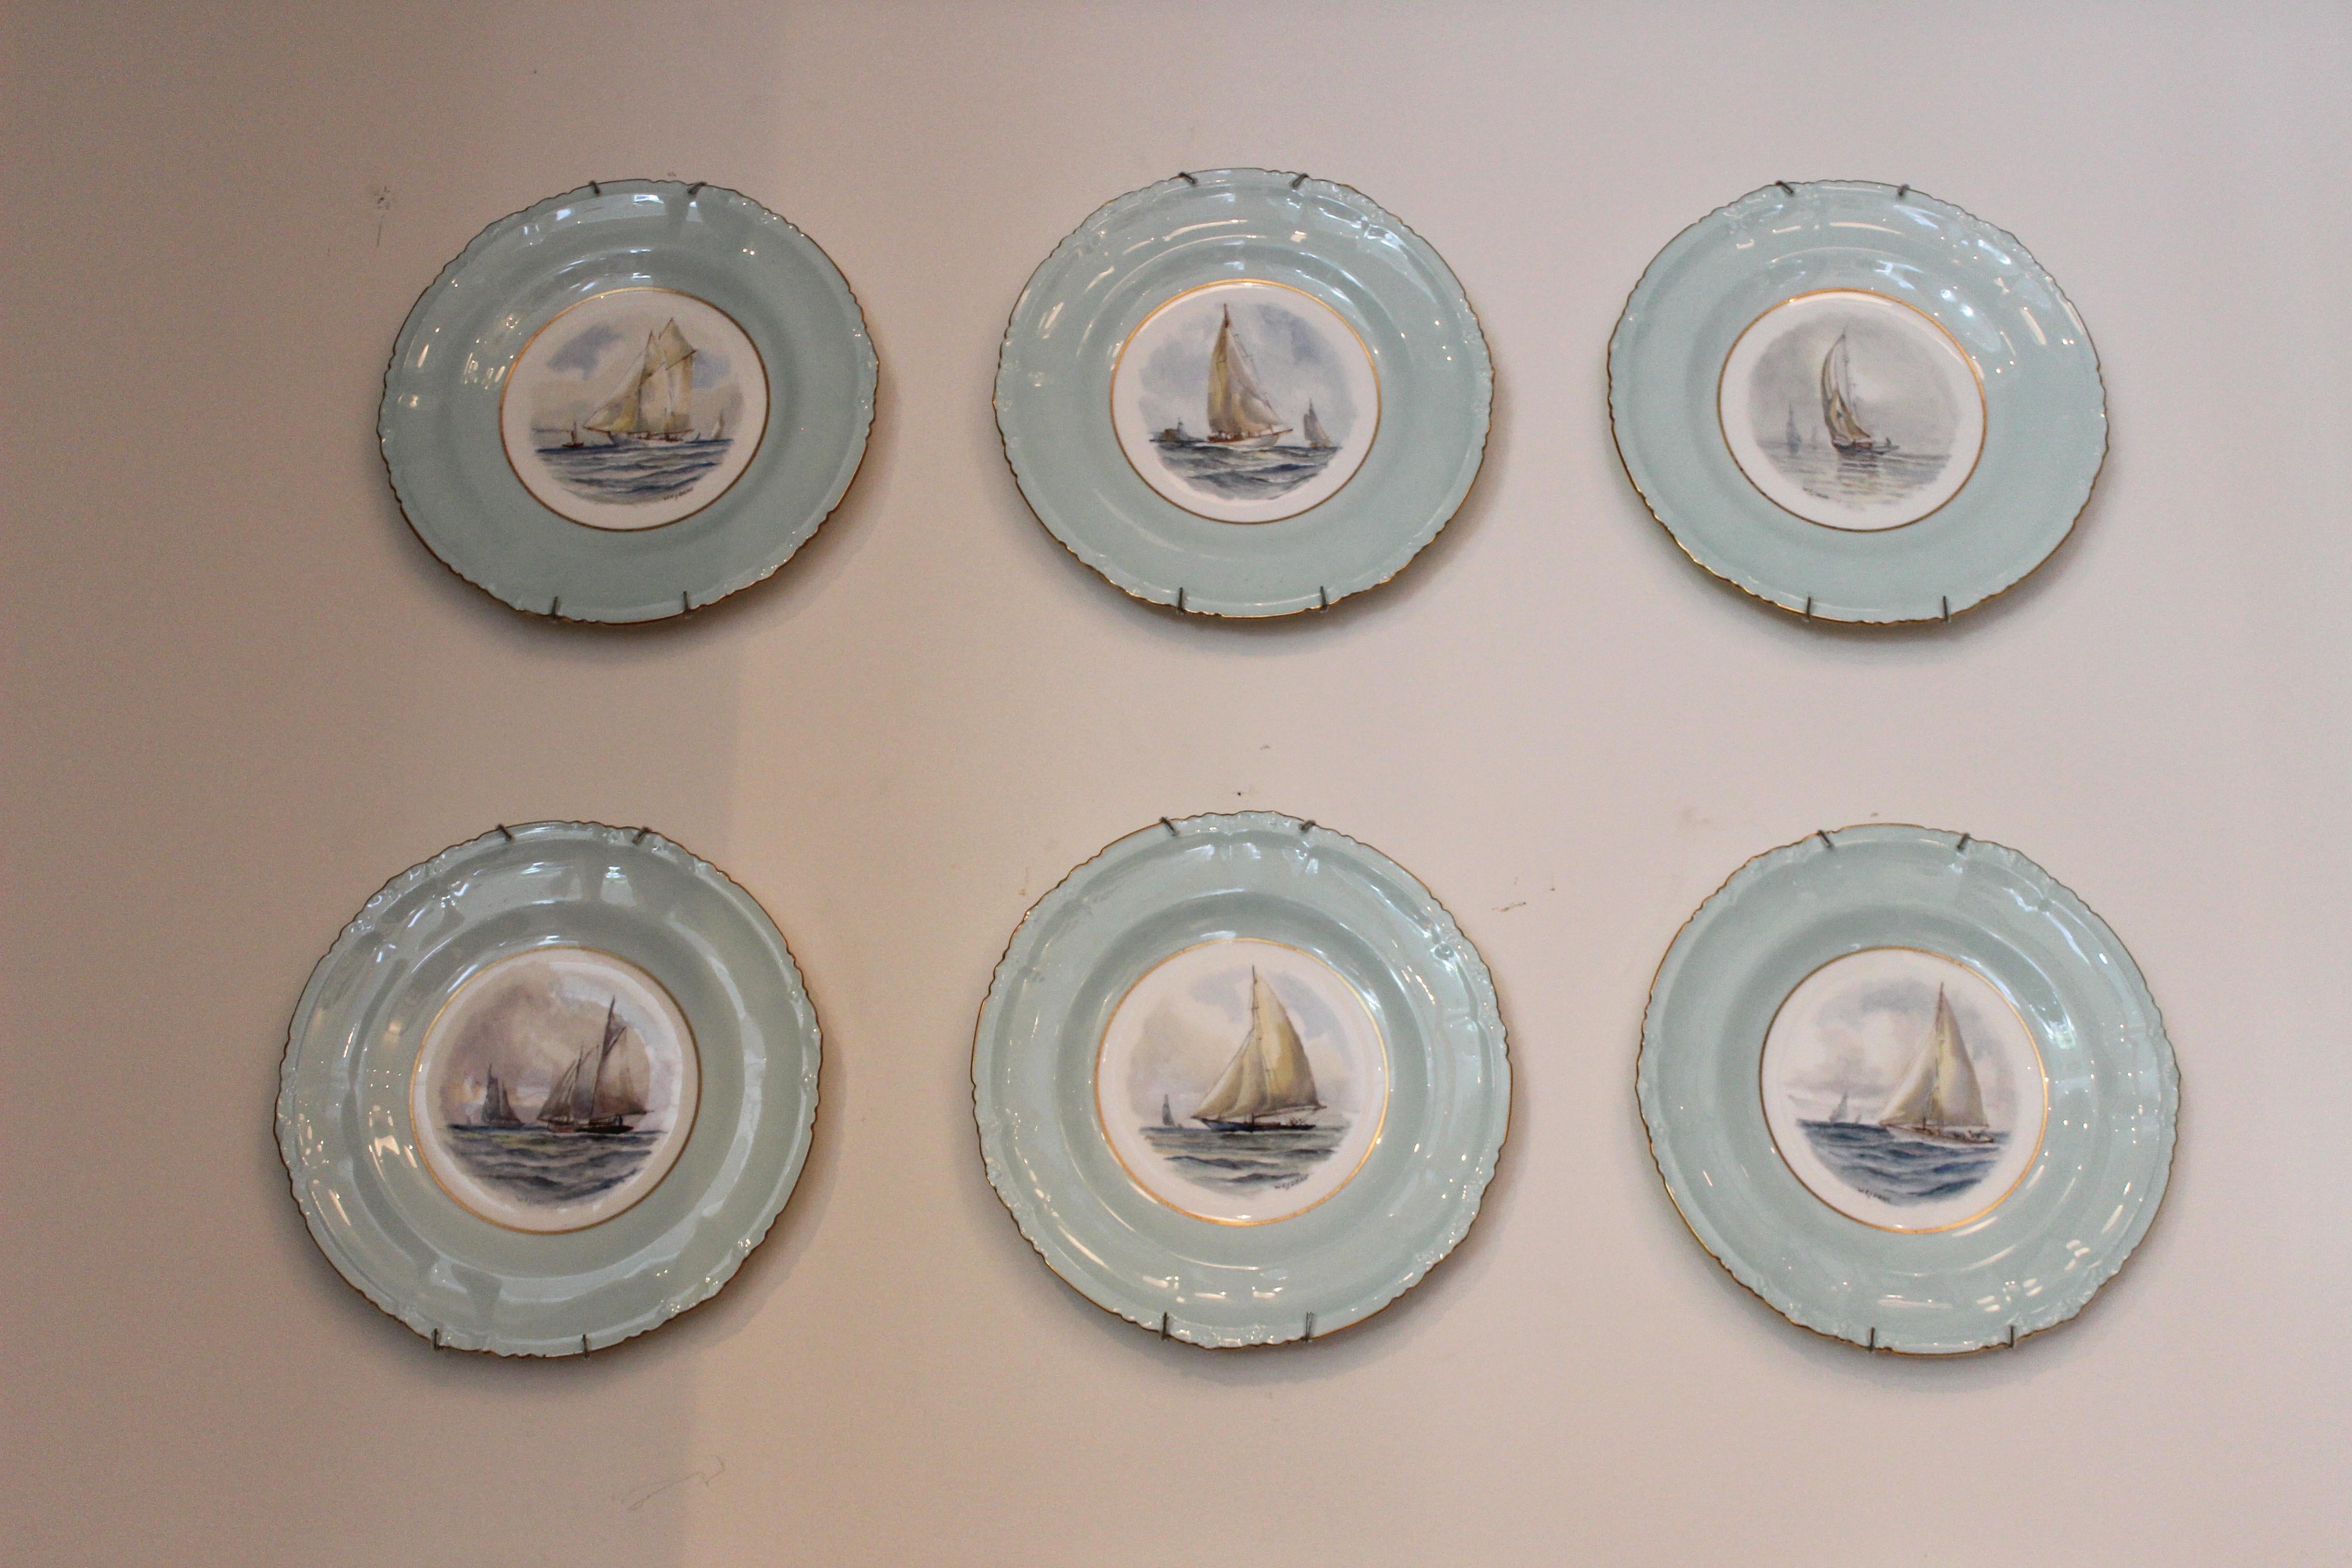 Set of 12 Royal Crown Derby Porcelain Plates with Yachting Scenes 2